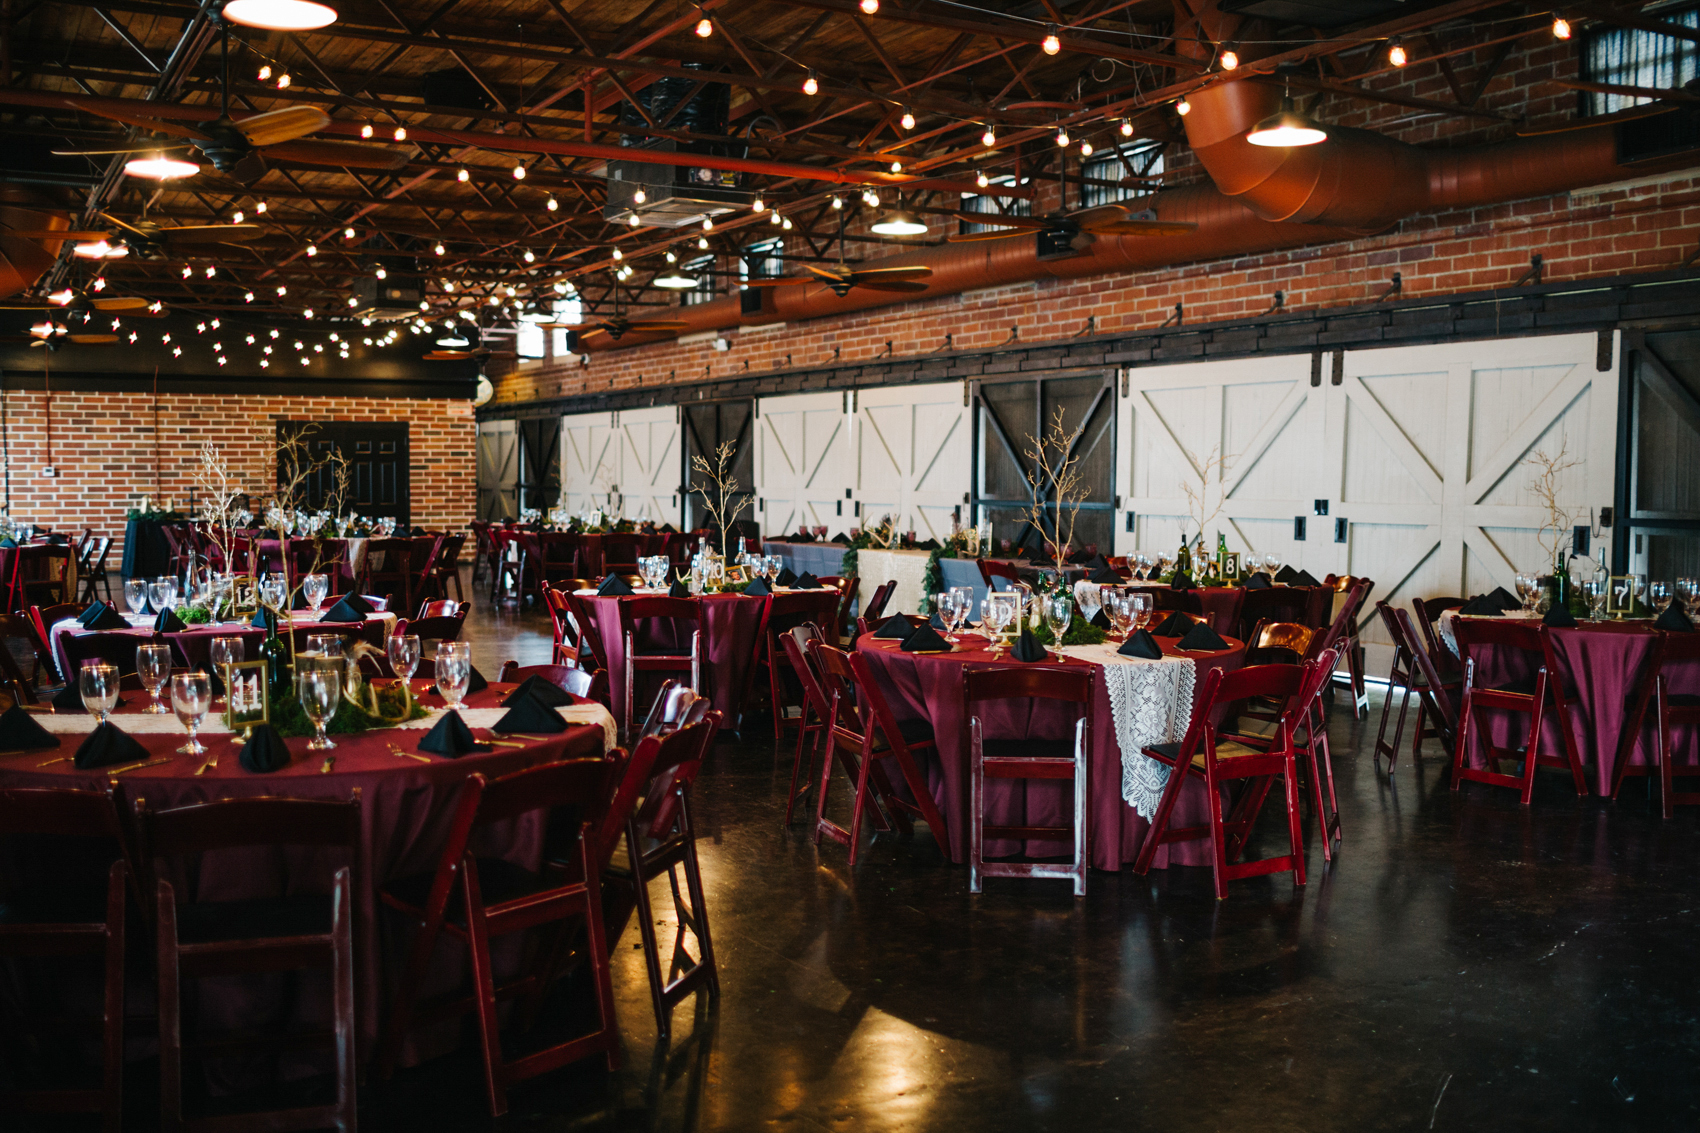 Burgundy boho wedding reception at the Winter Park Farmers Market with exposed brick walls and string lights